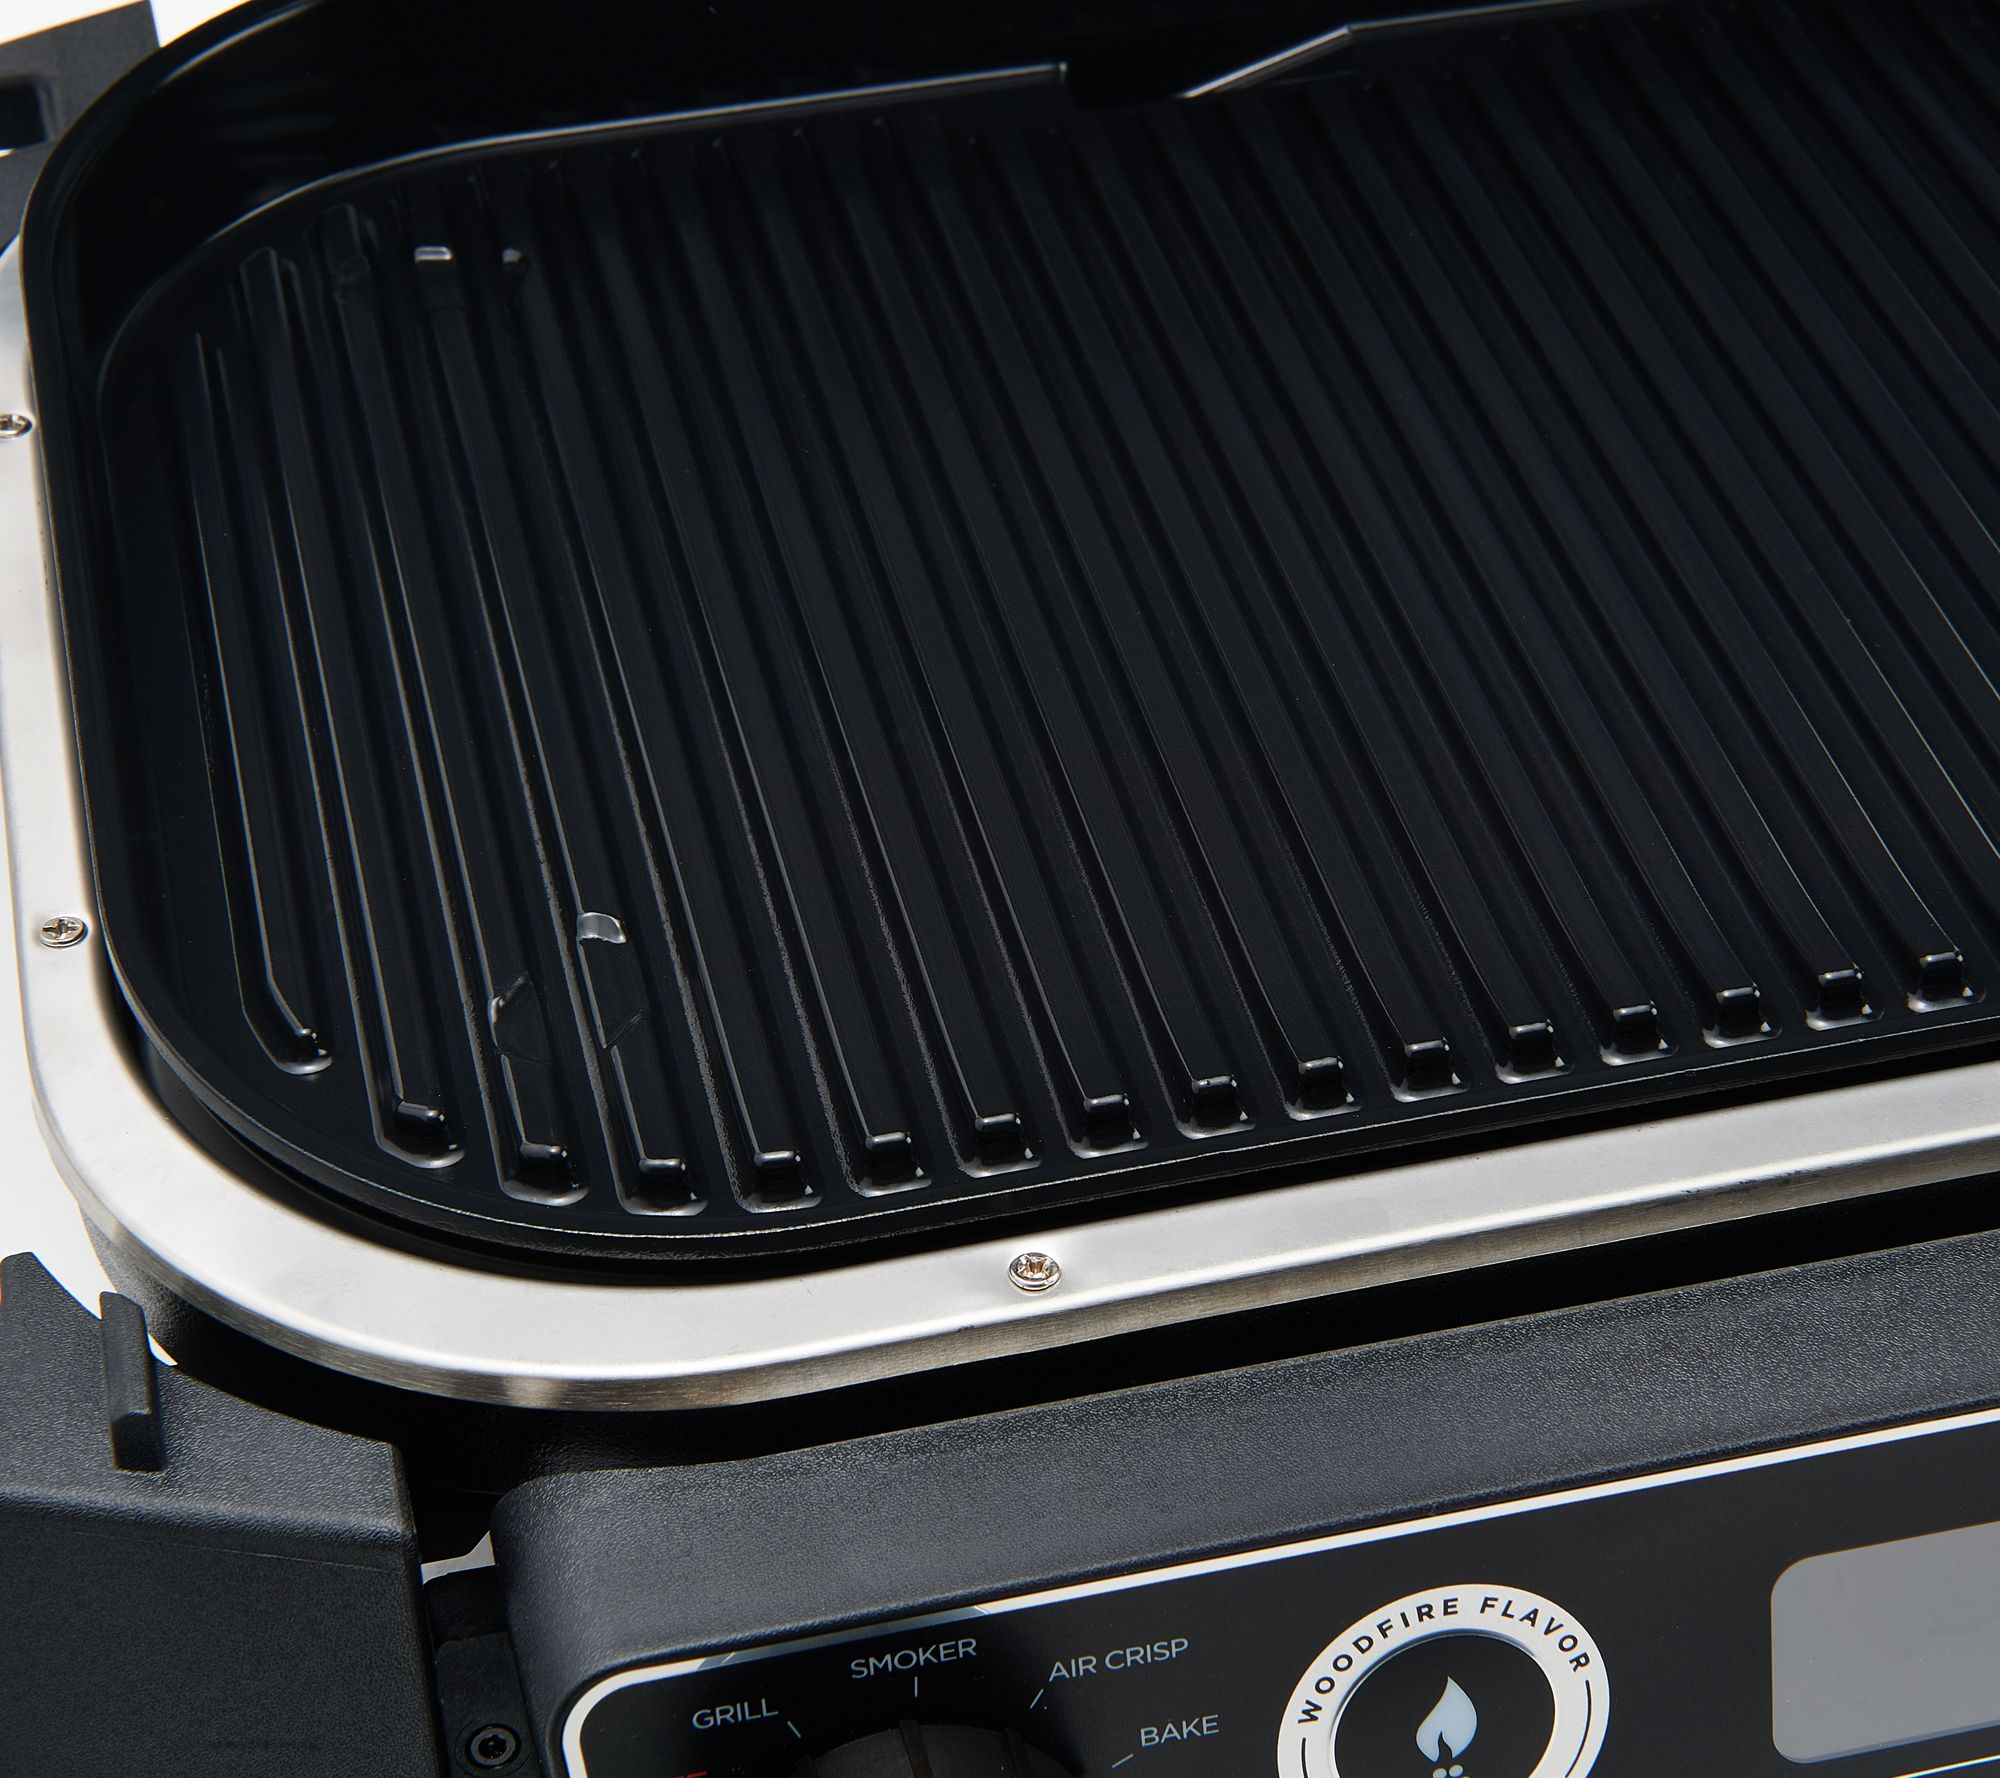 Ninja Woodfire Electric Grill and Air Fryer: Save $70 at QVC